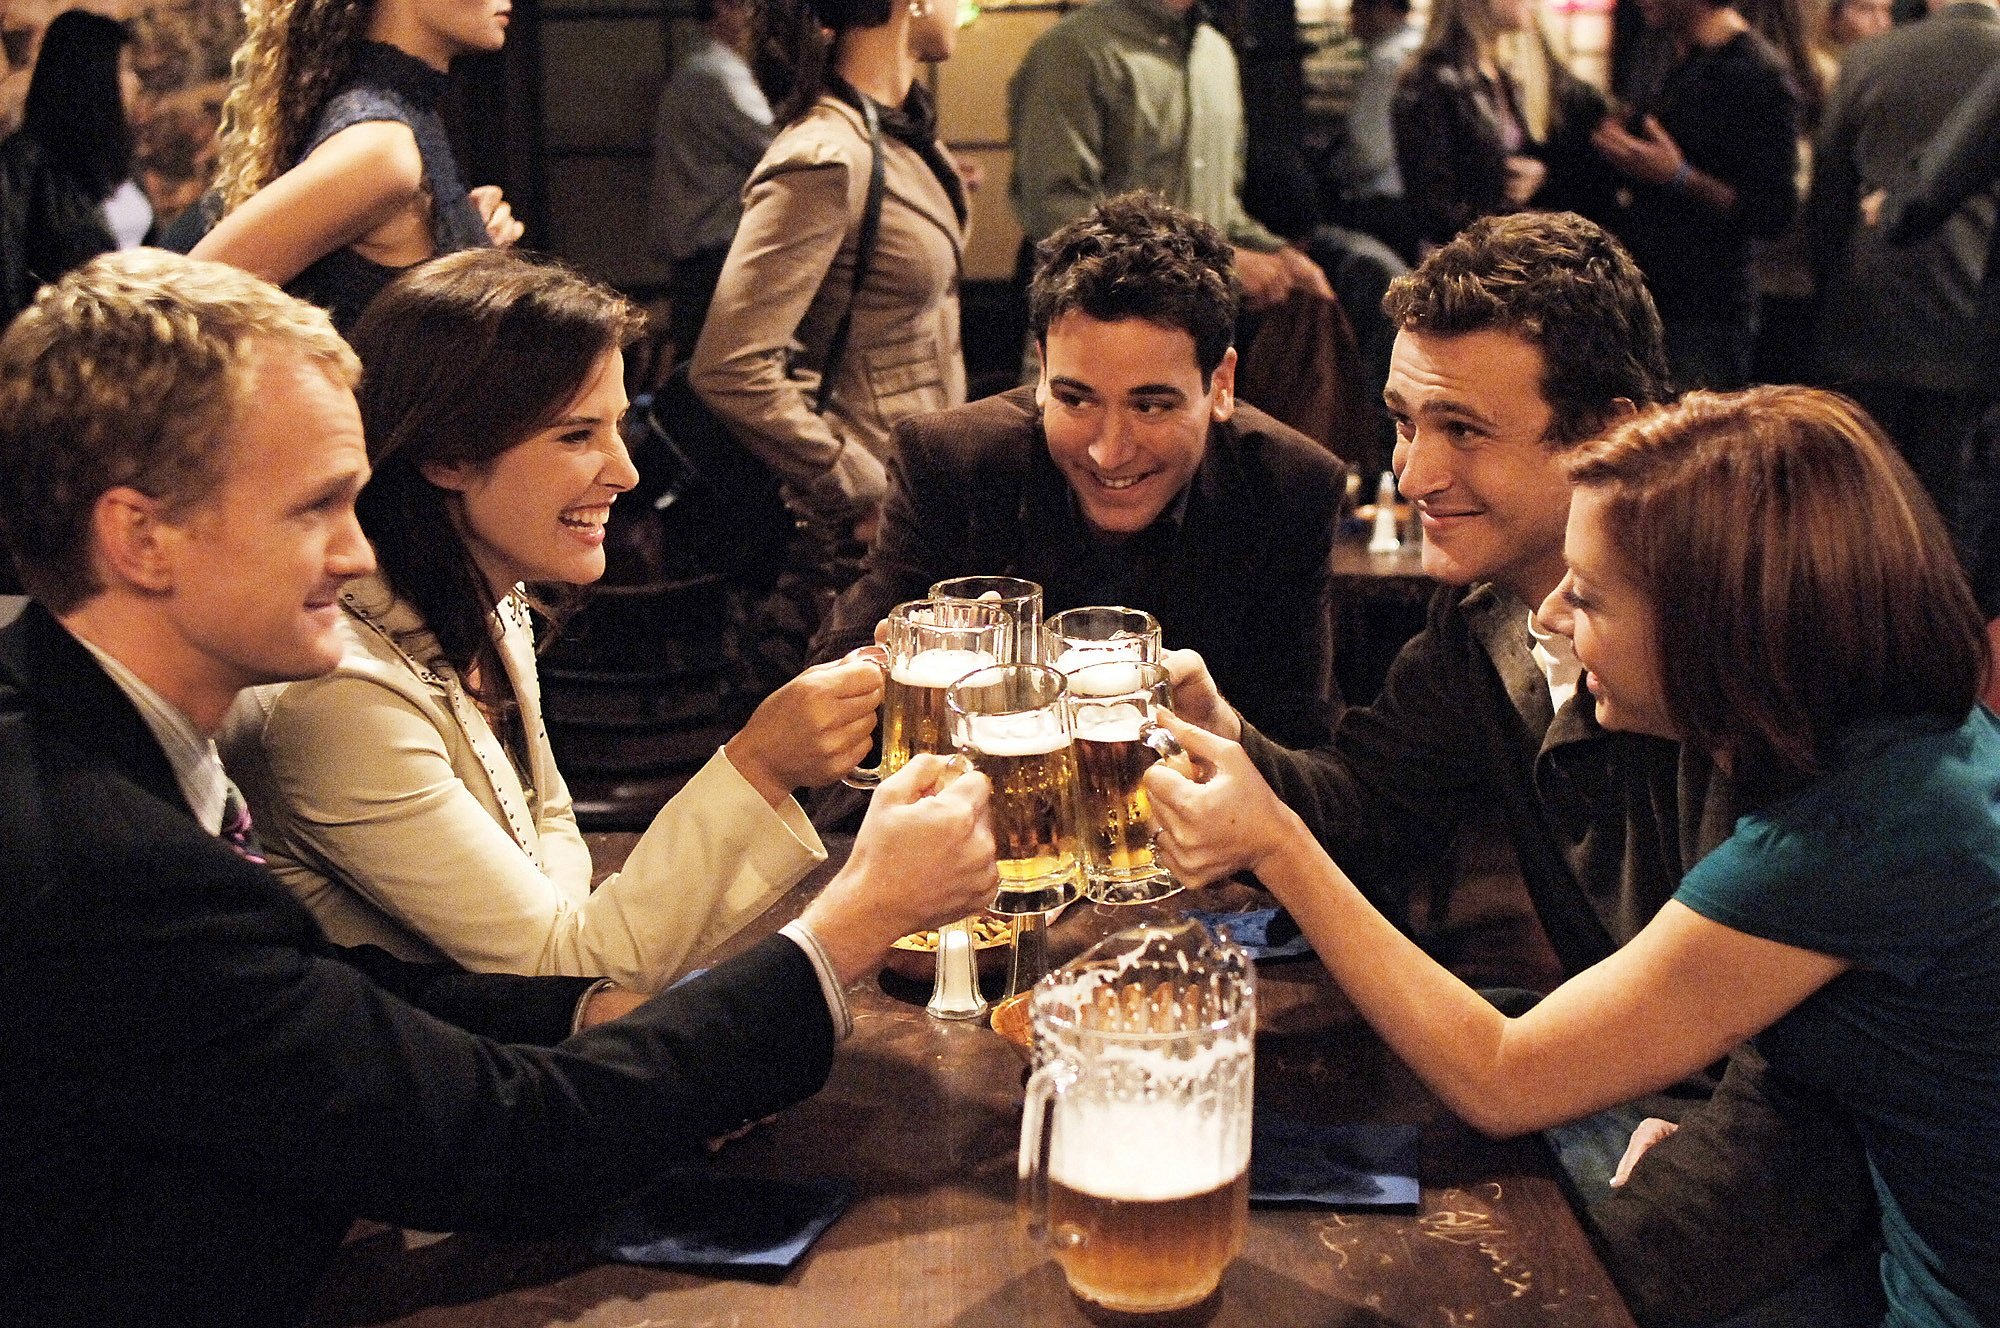 how i met your mother, Comedy, Sitcom, Series, Television, How, Met, Mother,  47 Wallpaper